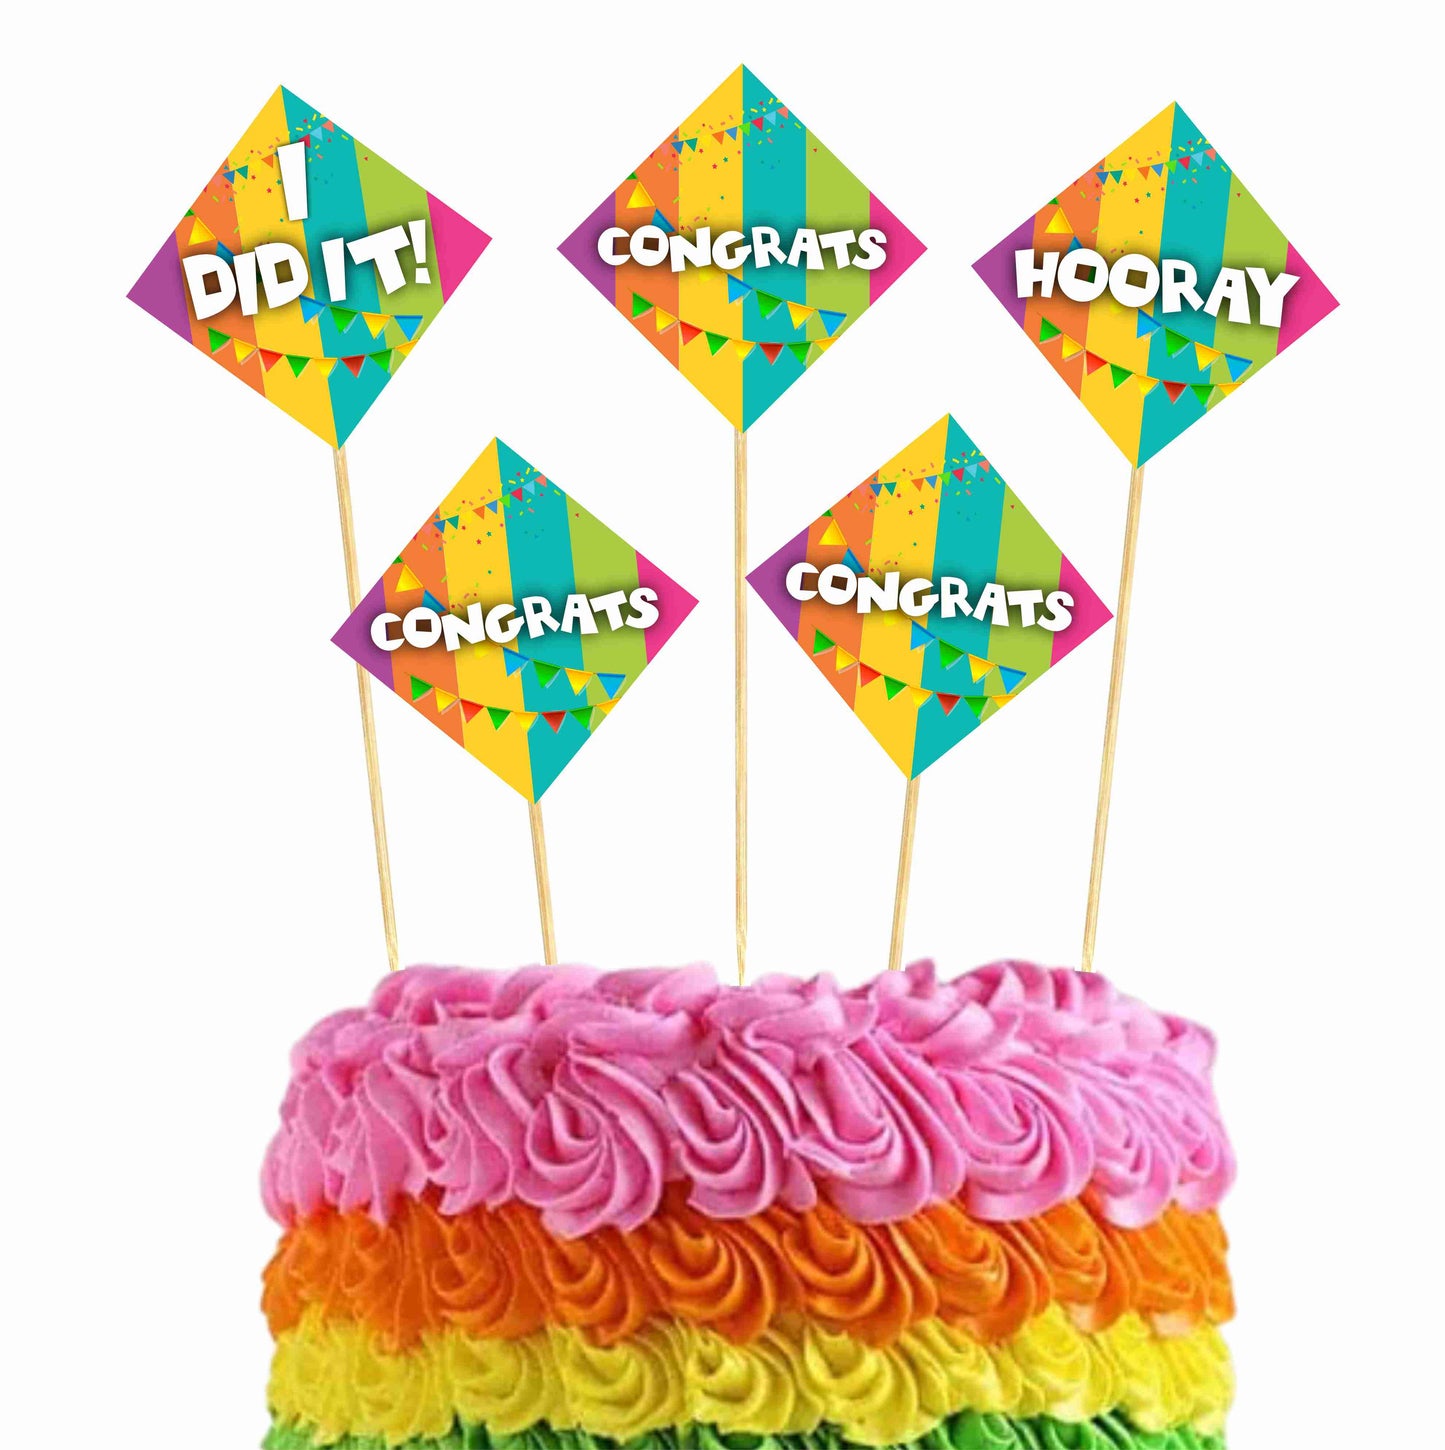 Congratulations Theme Cake Topper Pack of 10 Nos for Cake Decoration Theme Party Item